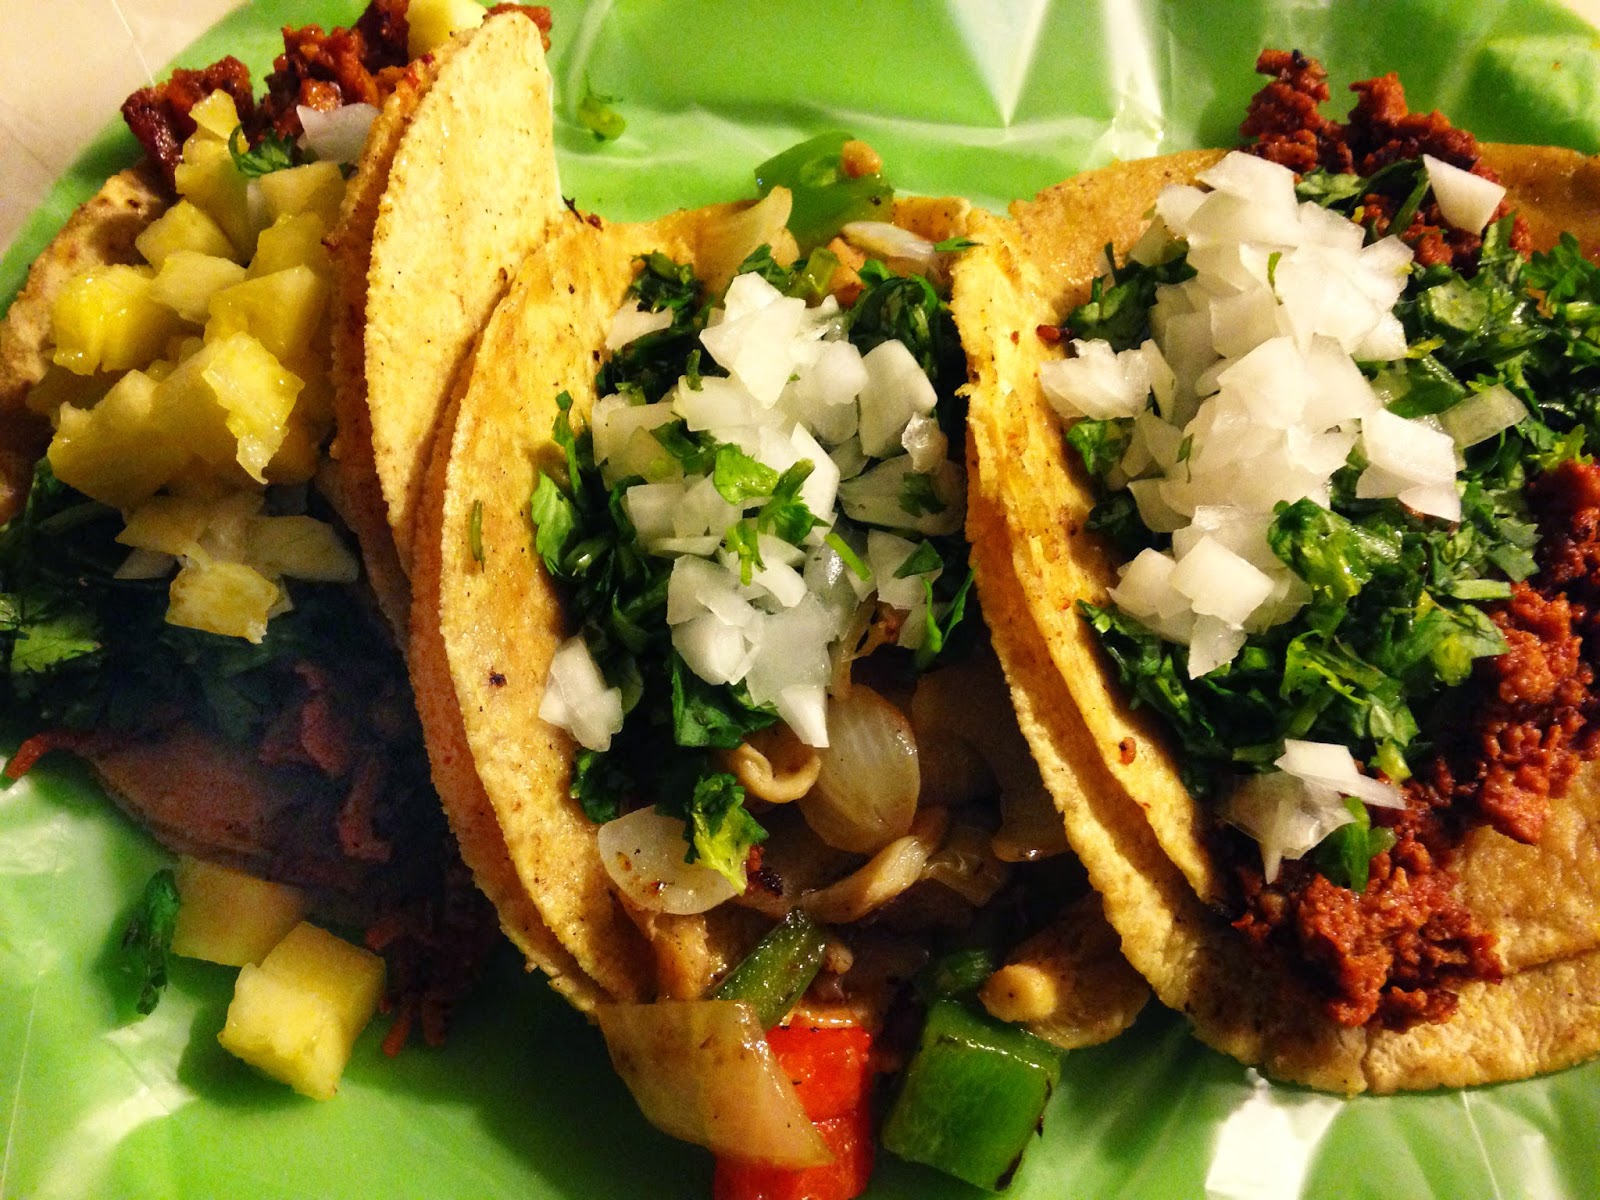 Mexico City: An Opinionated Guide: VEGAN TACOS